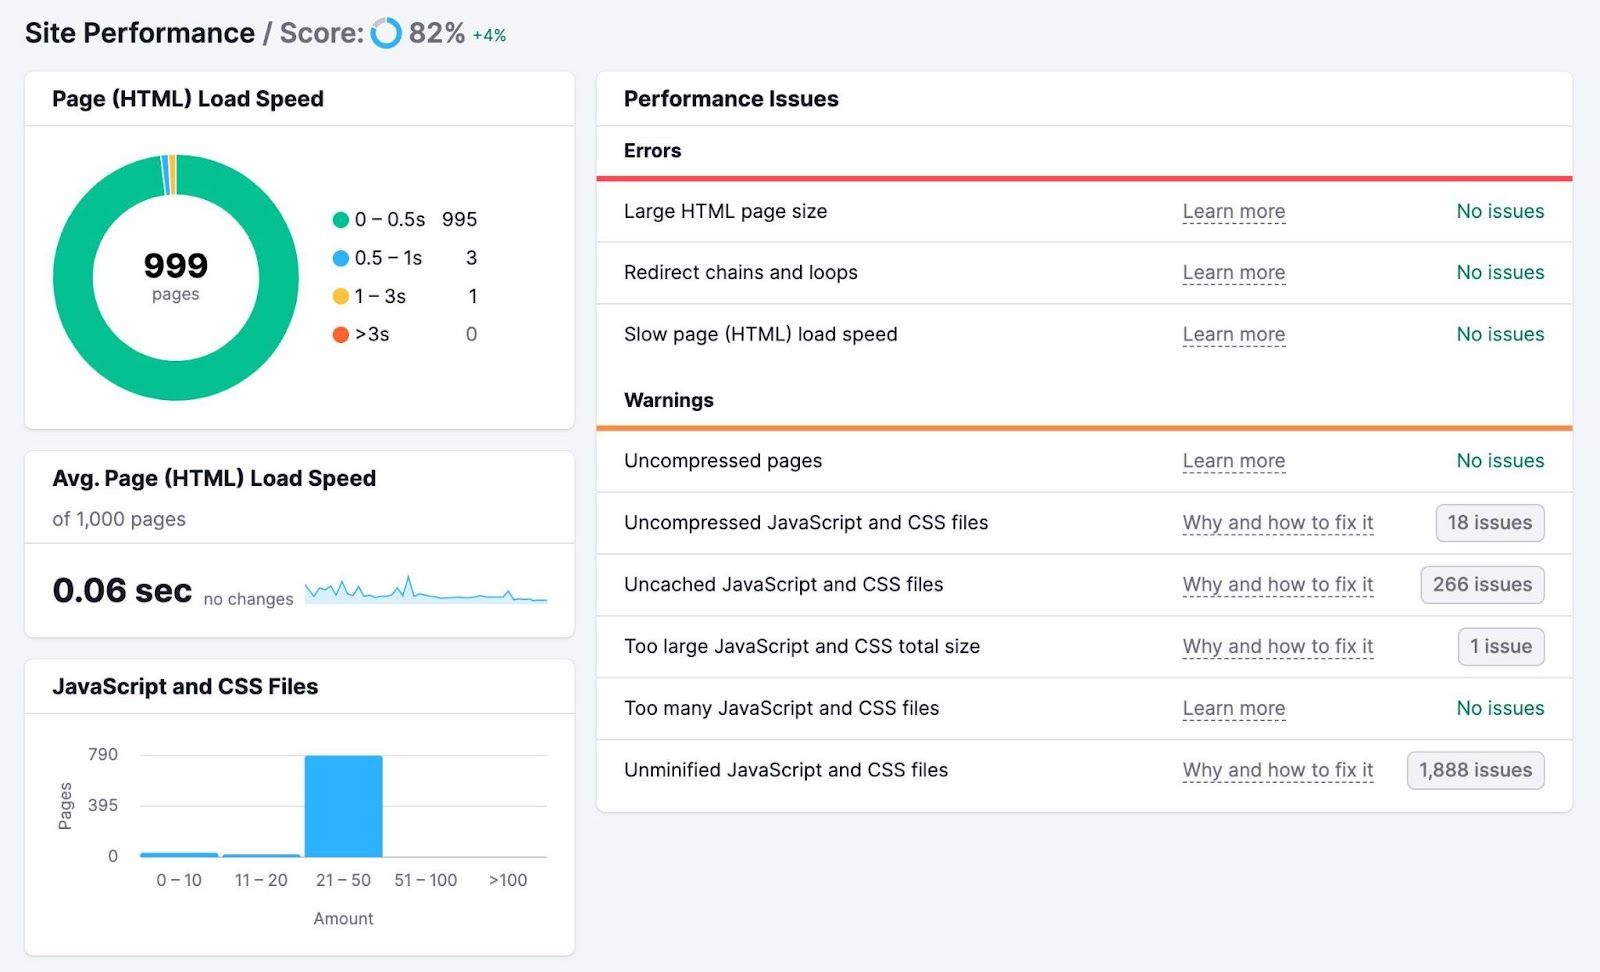 Site Performance Report breaking down load speed by page and performance issues like page size, uncompressed pages, etc.